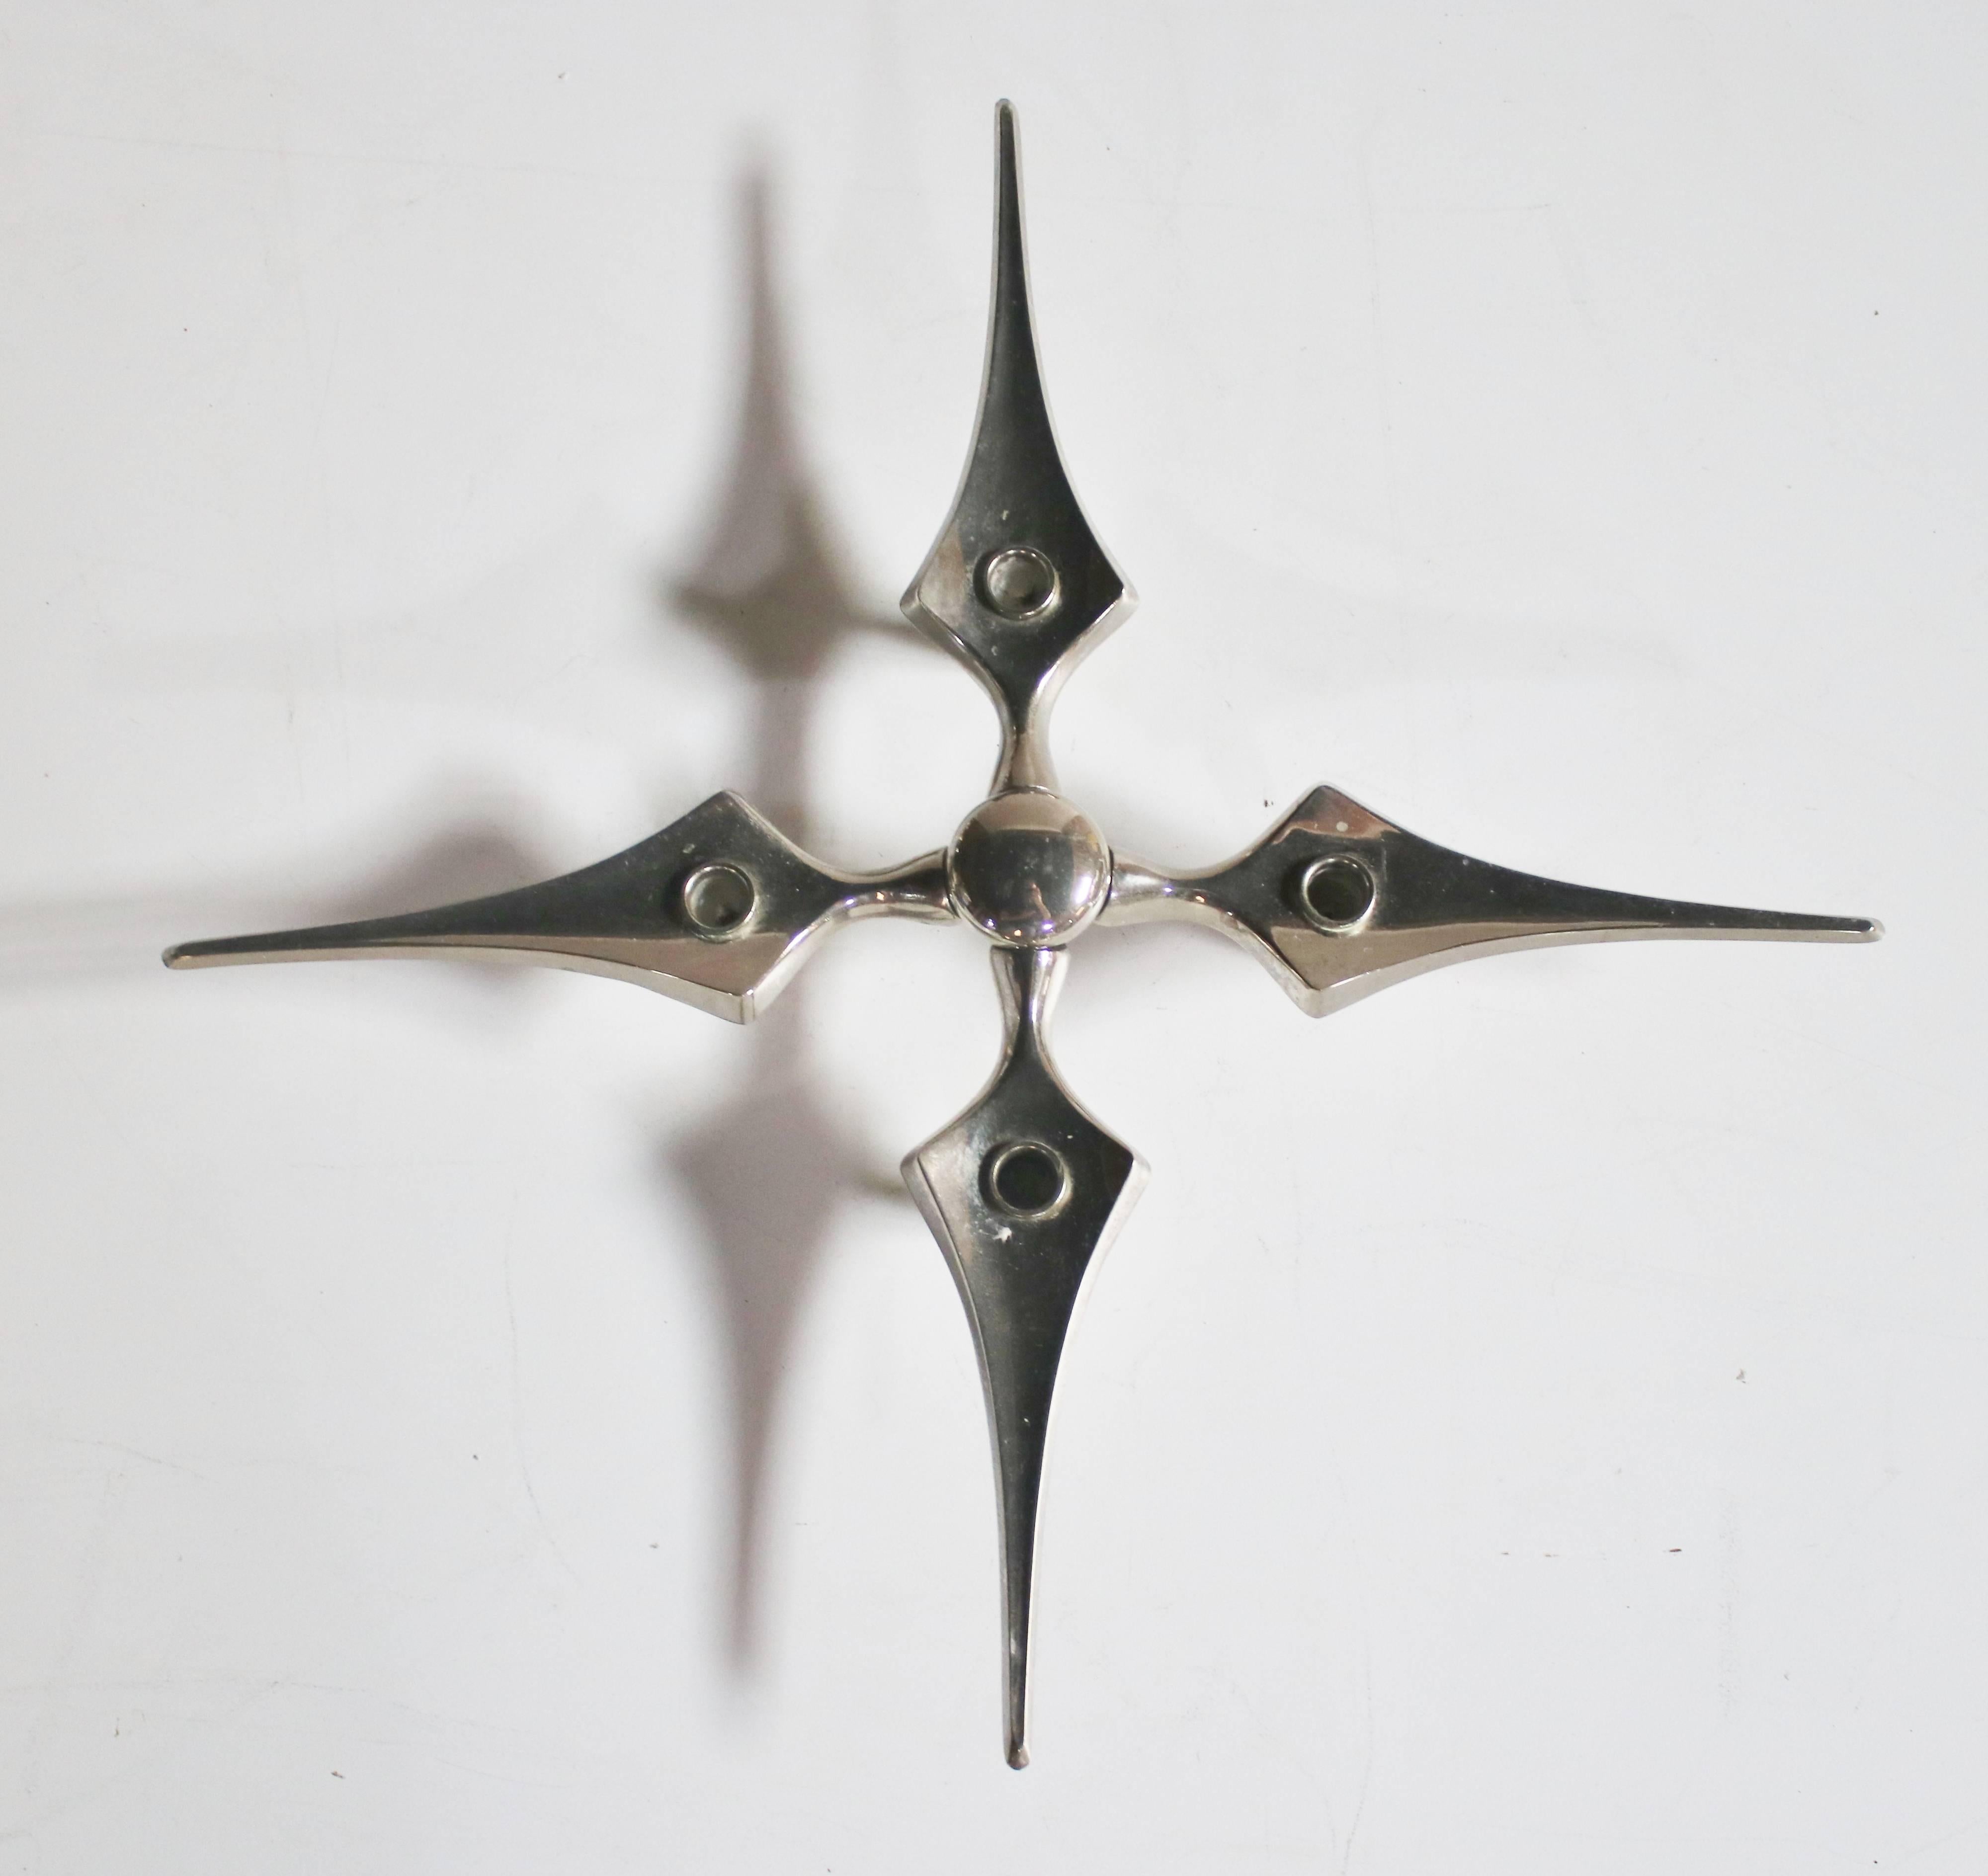 Very rare Nagel candleholder designed by Fritz Nagel and Caesar Stoffi in West Germany, 1960s. This star shape candle is interchangeable with all the variations of the Nagel candles and comes with three BMF Variante units. Dimensions listed are of